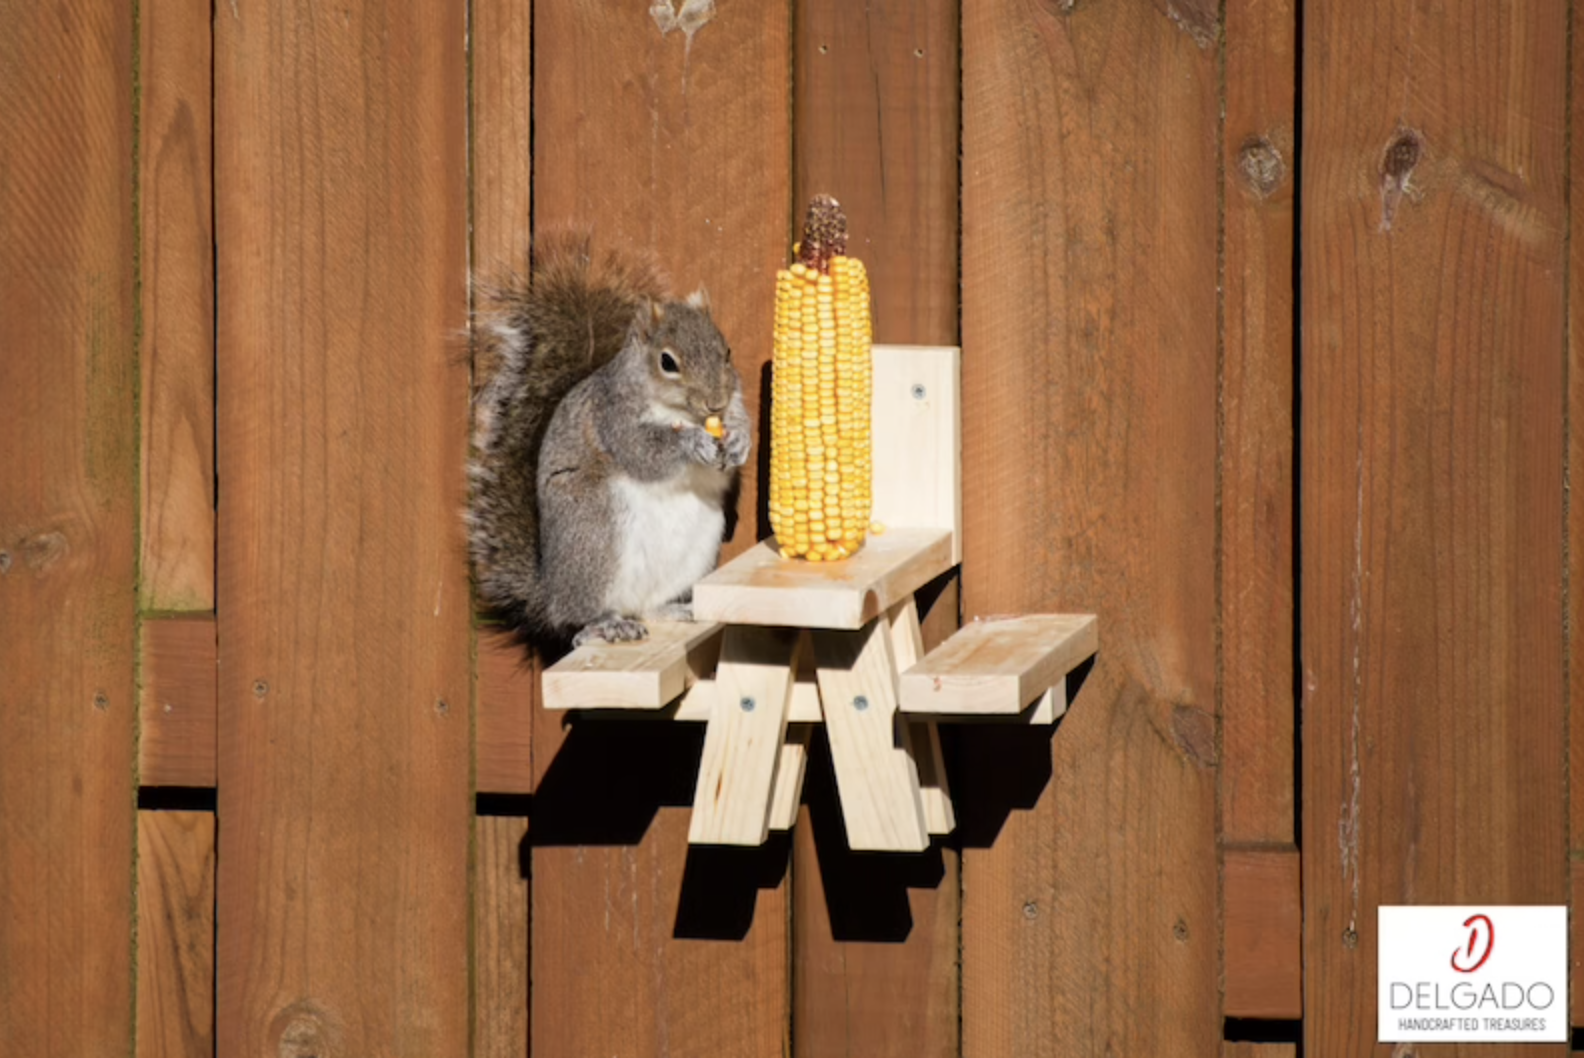 a squirrel nibbling on corn on the cob while standing on a small picnic table that is screwed into a fence